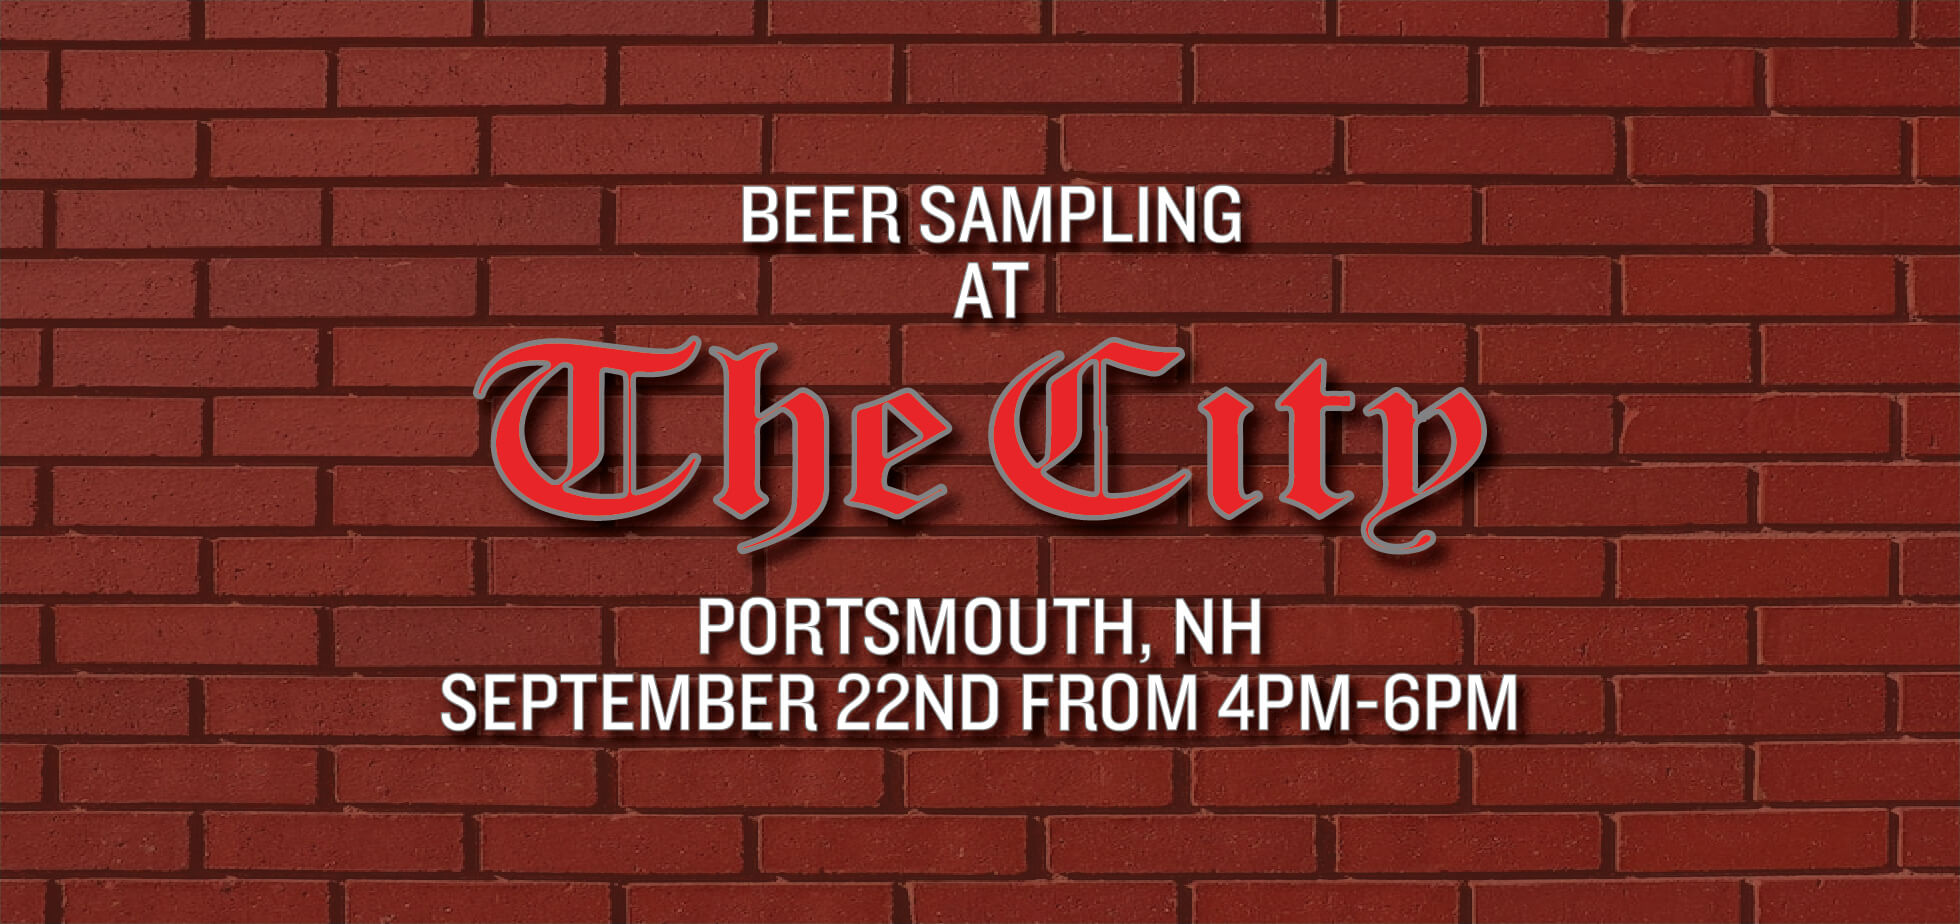 image promoting a beer sampling at The City in Portsmouth New hampshire September 22nd 4pm-6pm